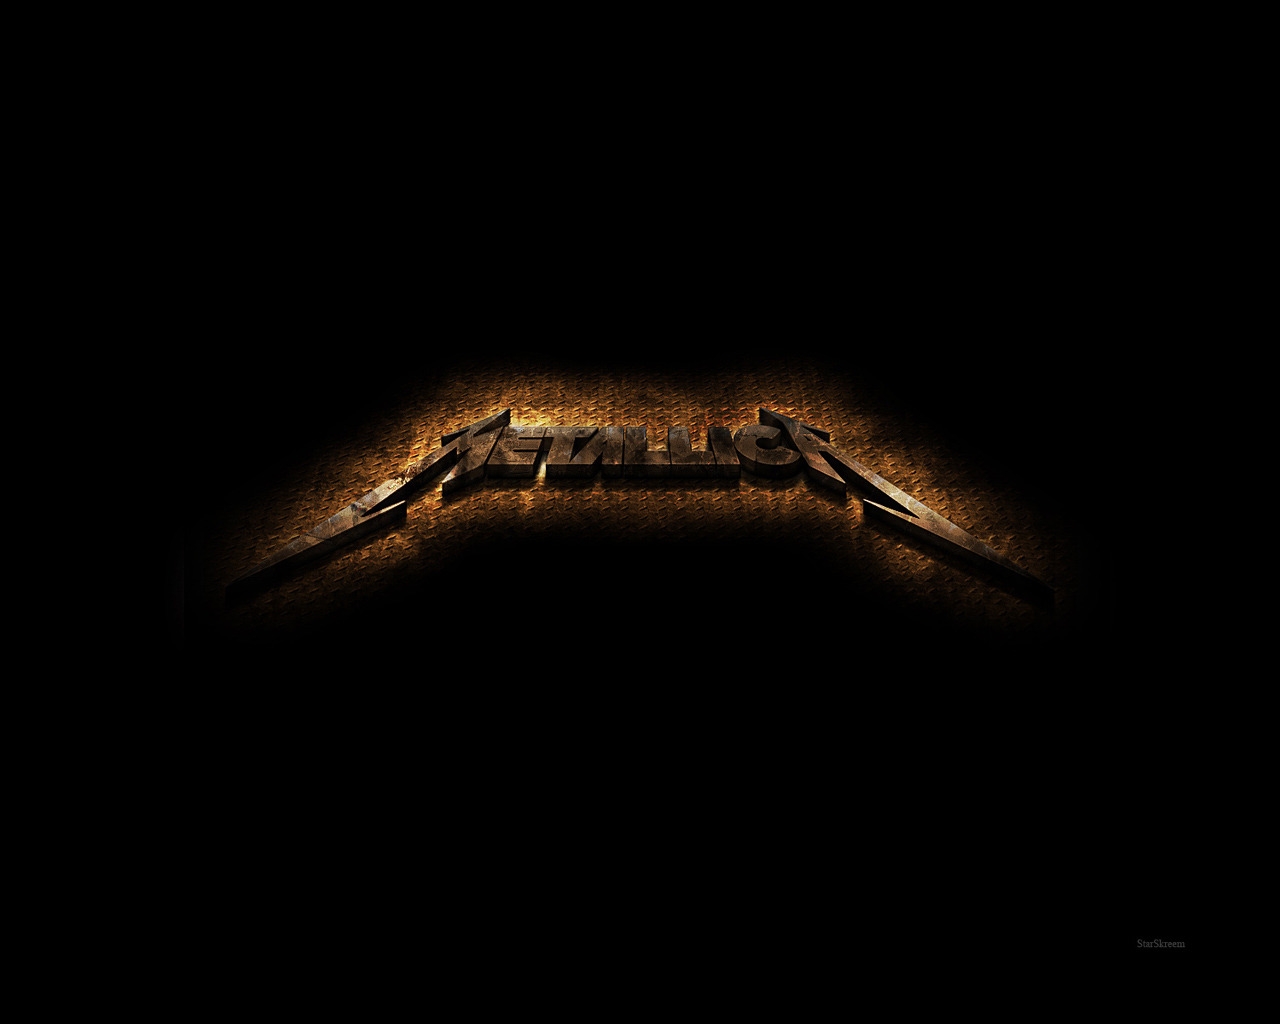 Metallica Rusted for 1280 x 1024 resolution